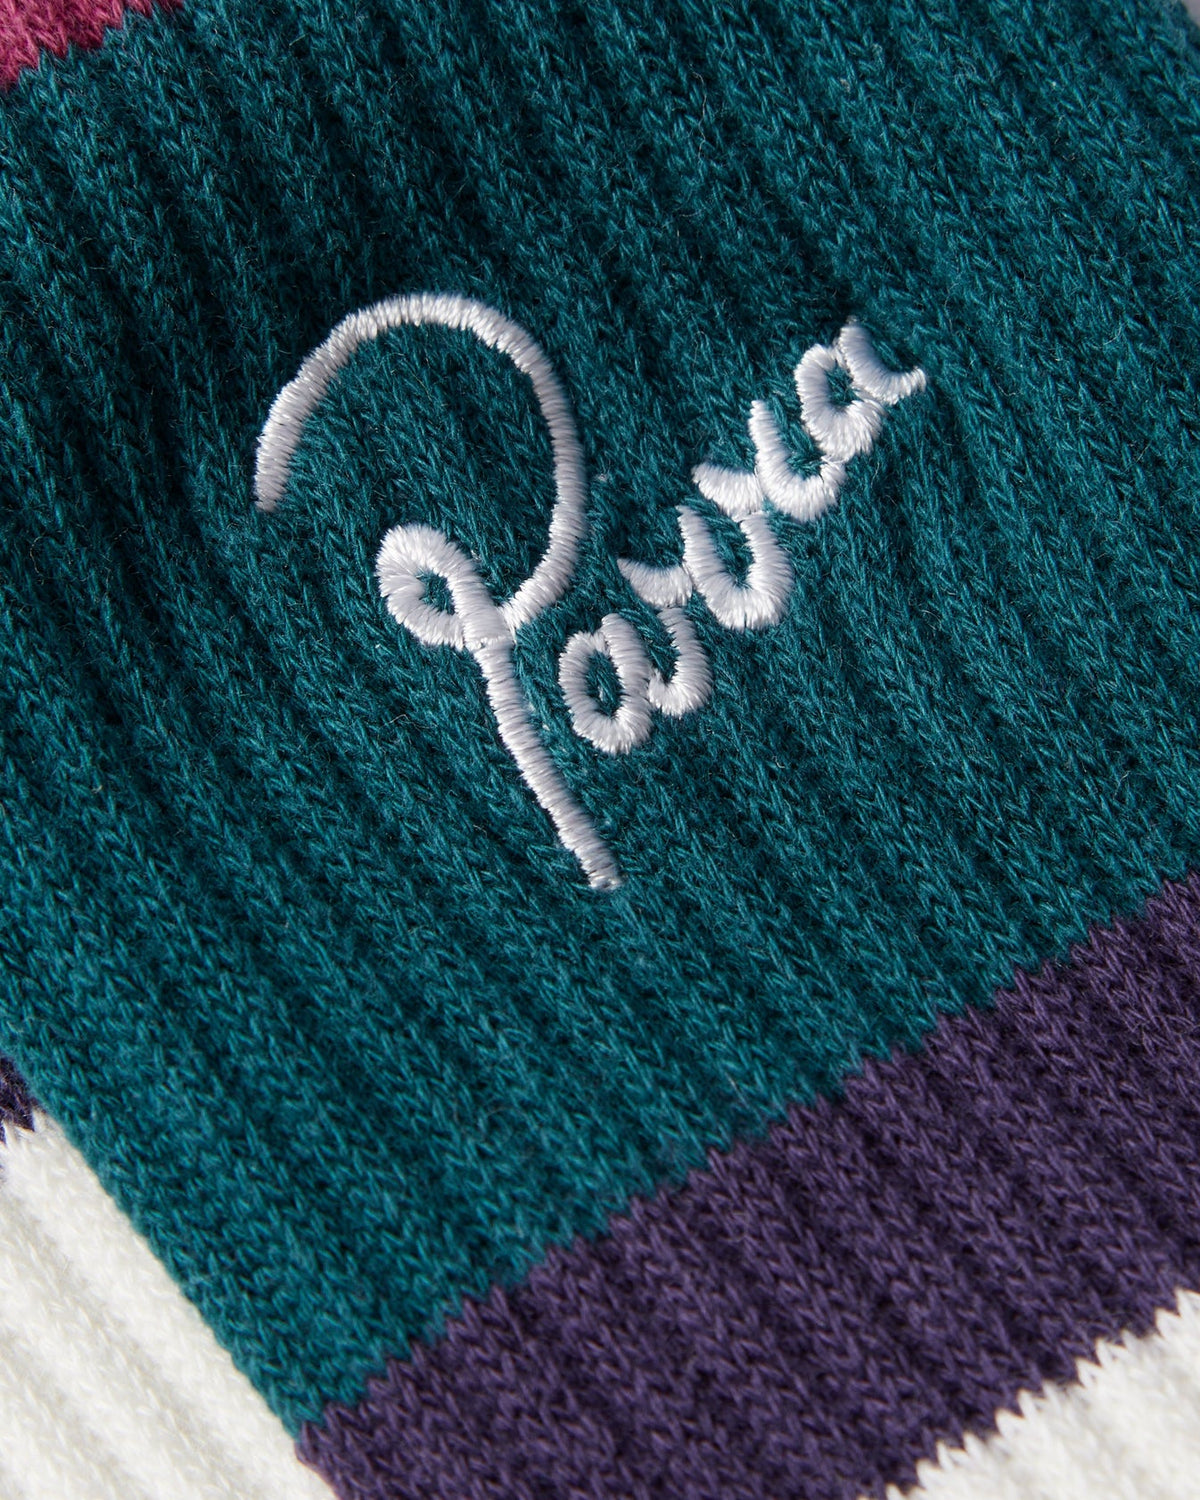 BY PARRA THE USUAL CREW SOCKS